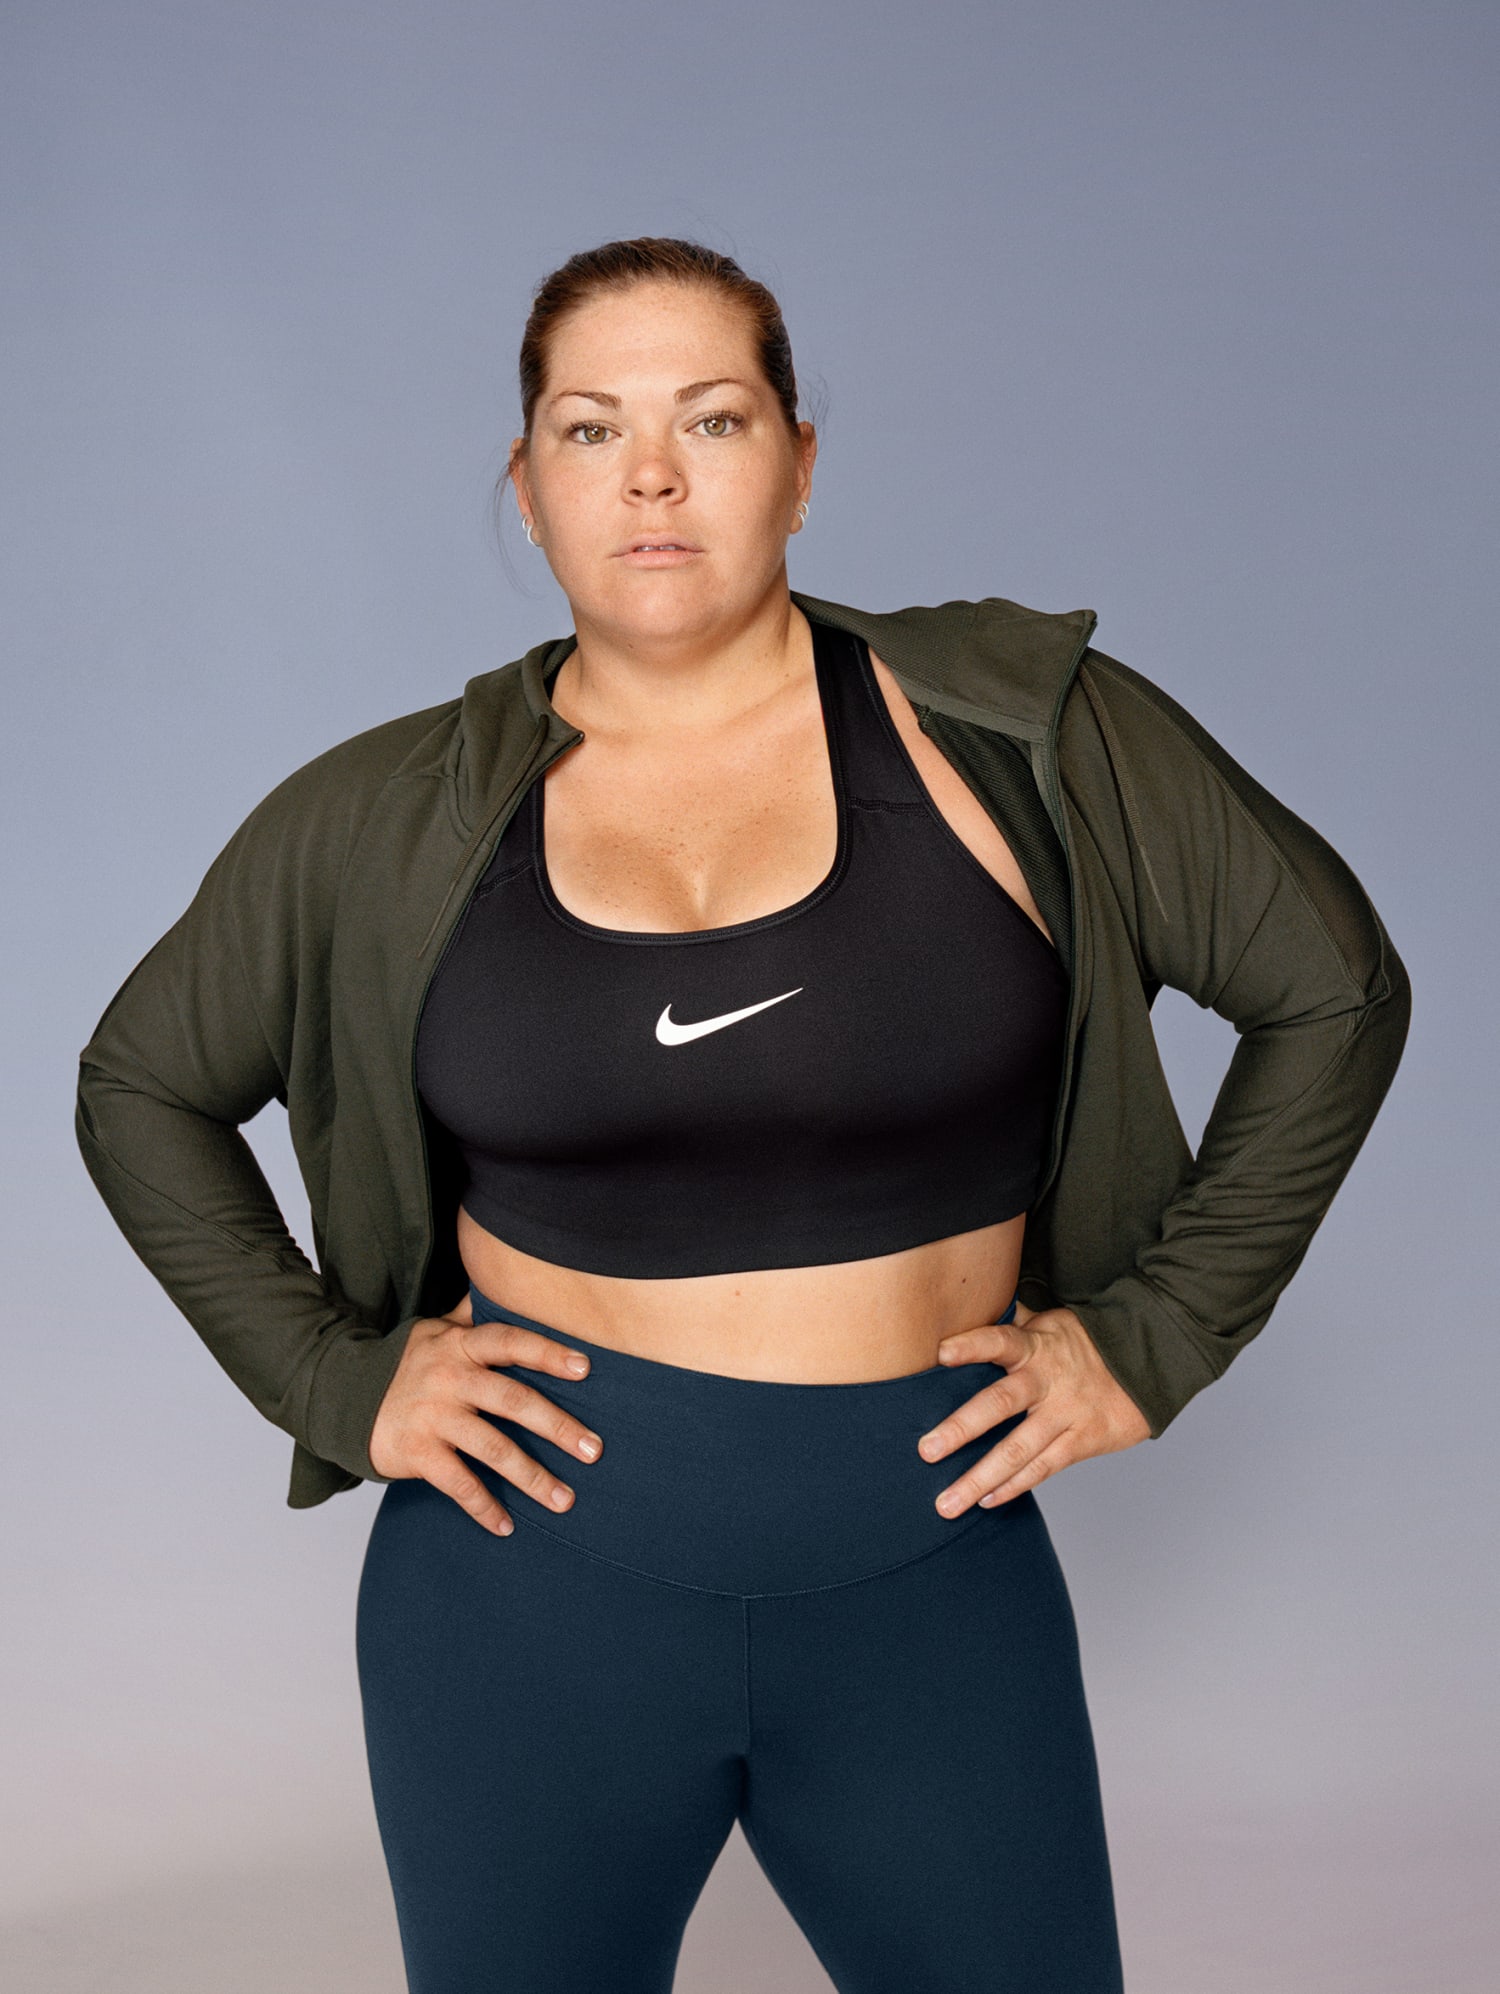 Plus-Size Nike Model Grace Victory Claps Back at Fat-shamers on Twitter